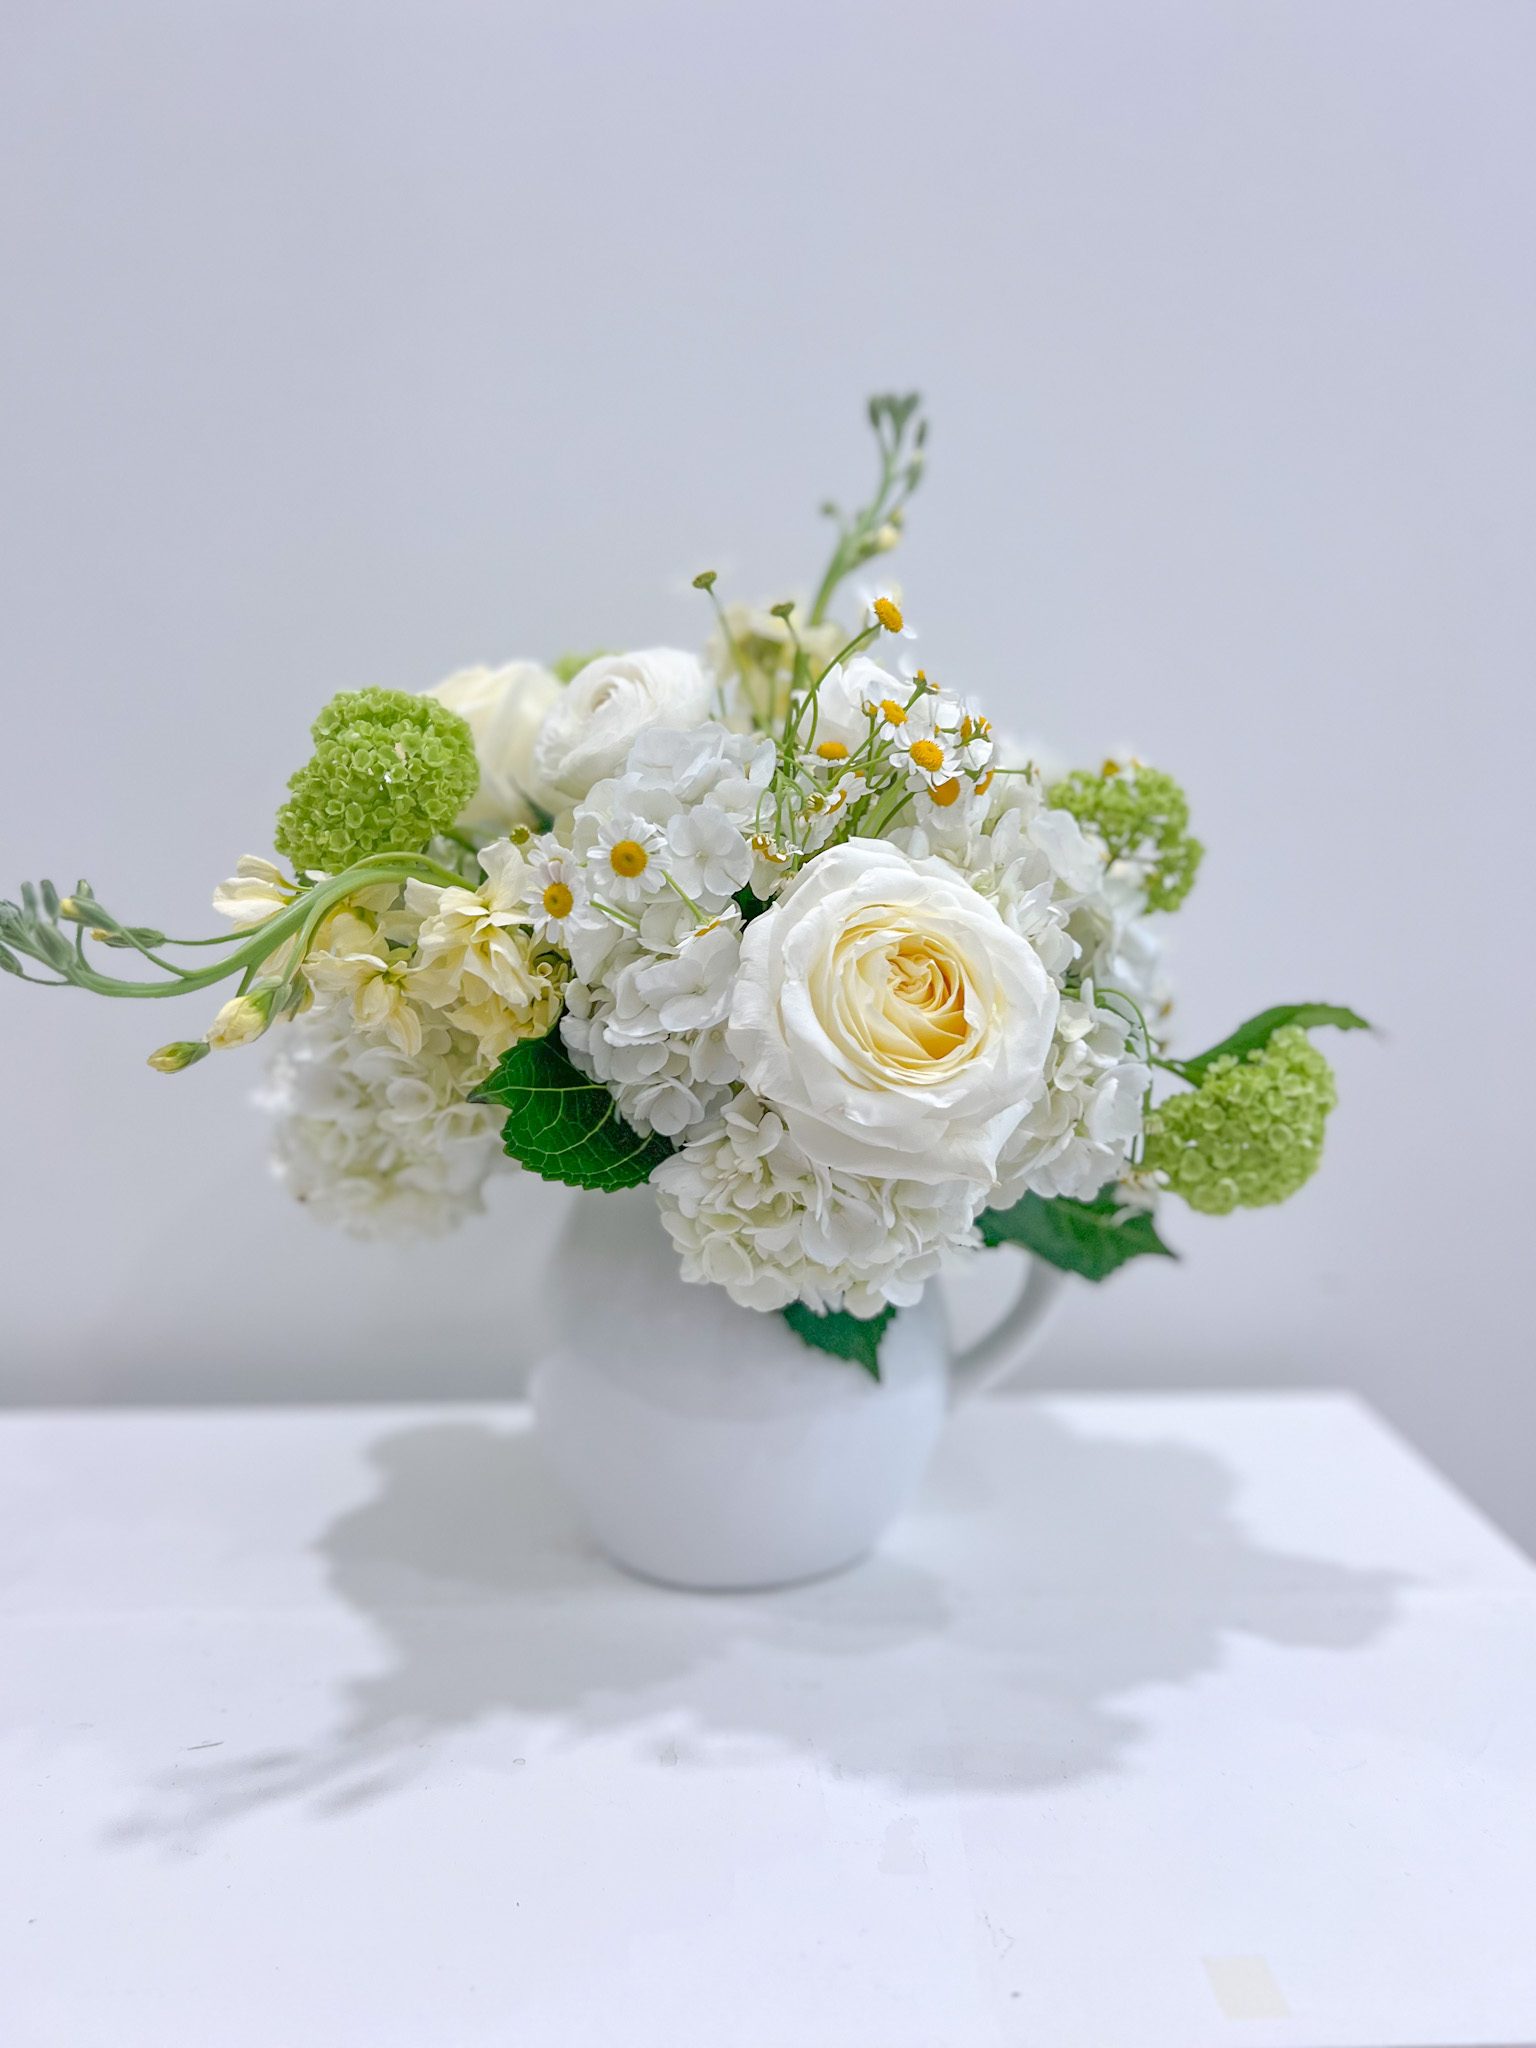 A full arrangement in white, crisp green and pale yellows designed into a jug vase.